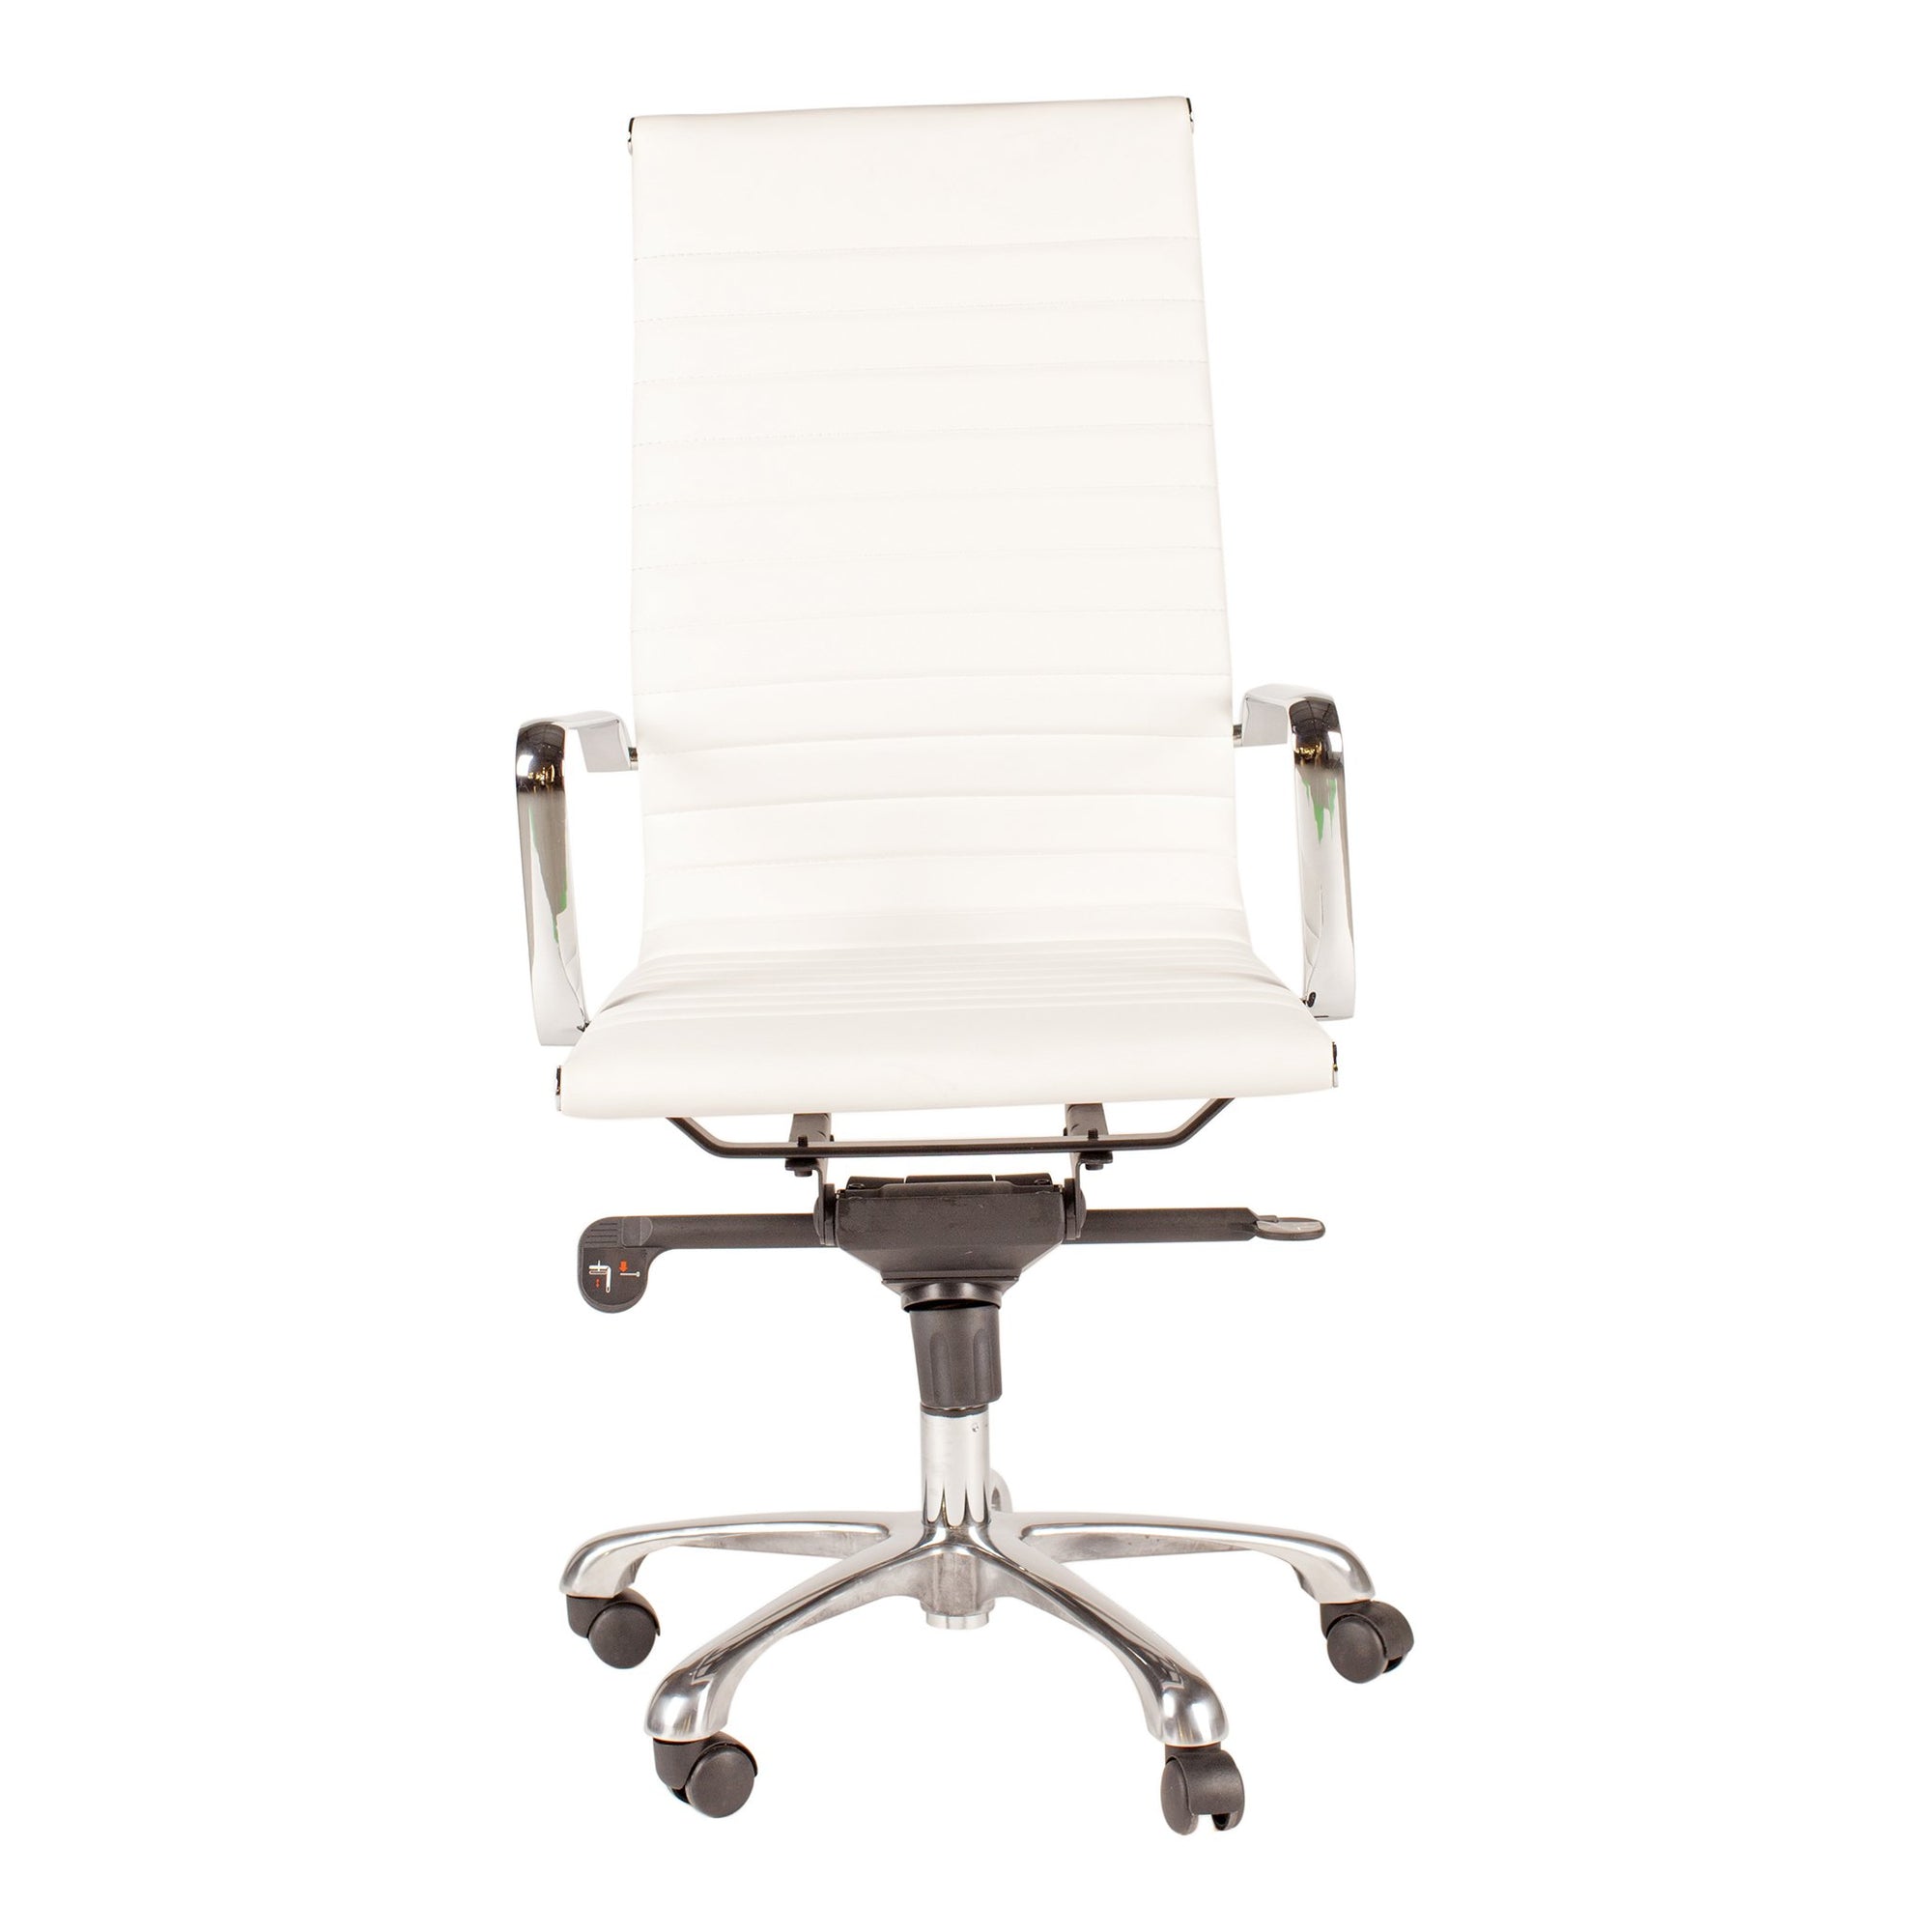 MOES-OMEGA OFFICE CHAIR HIGH BACK-Office Chairs-MODTEMPO